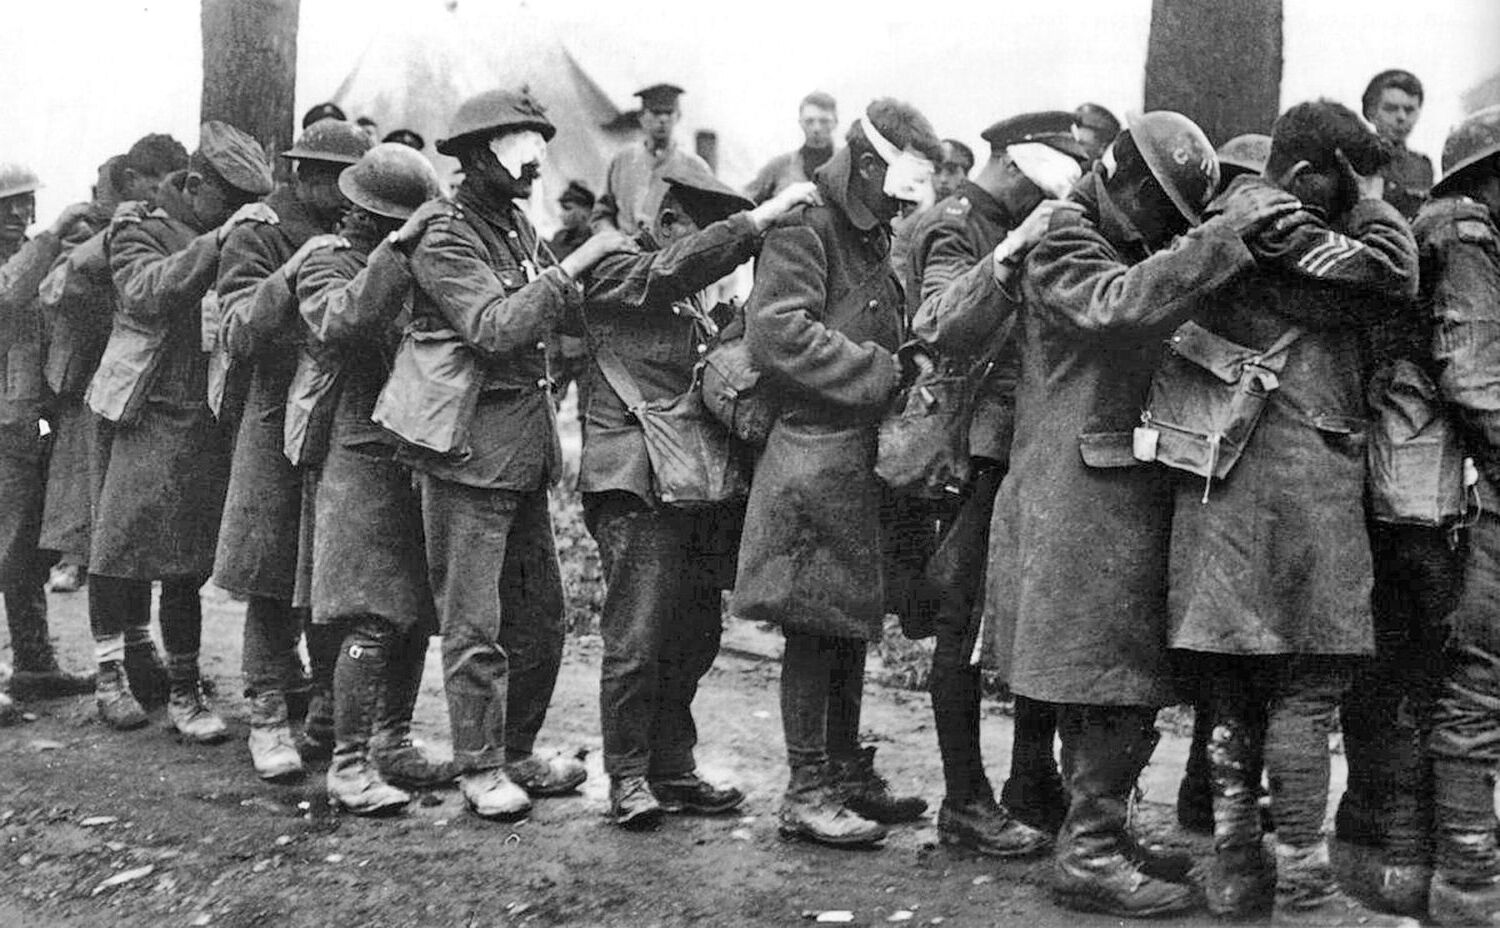 18-facts-about-chemical-warfare-ww1